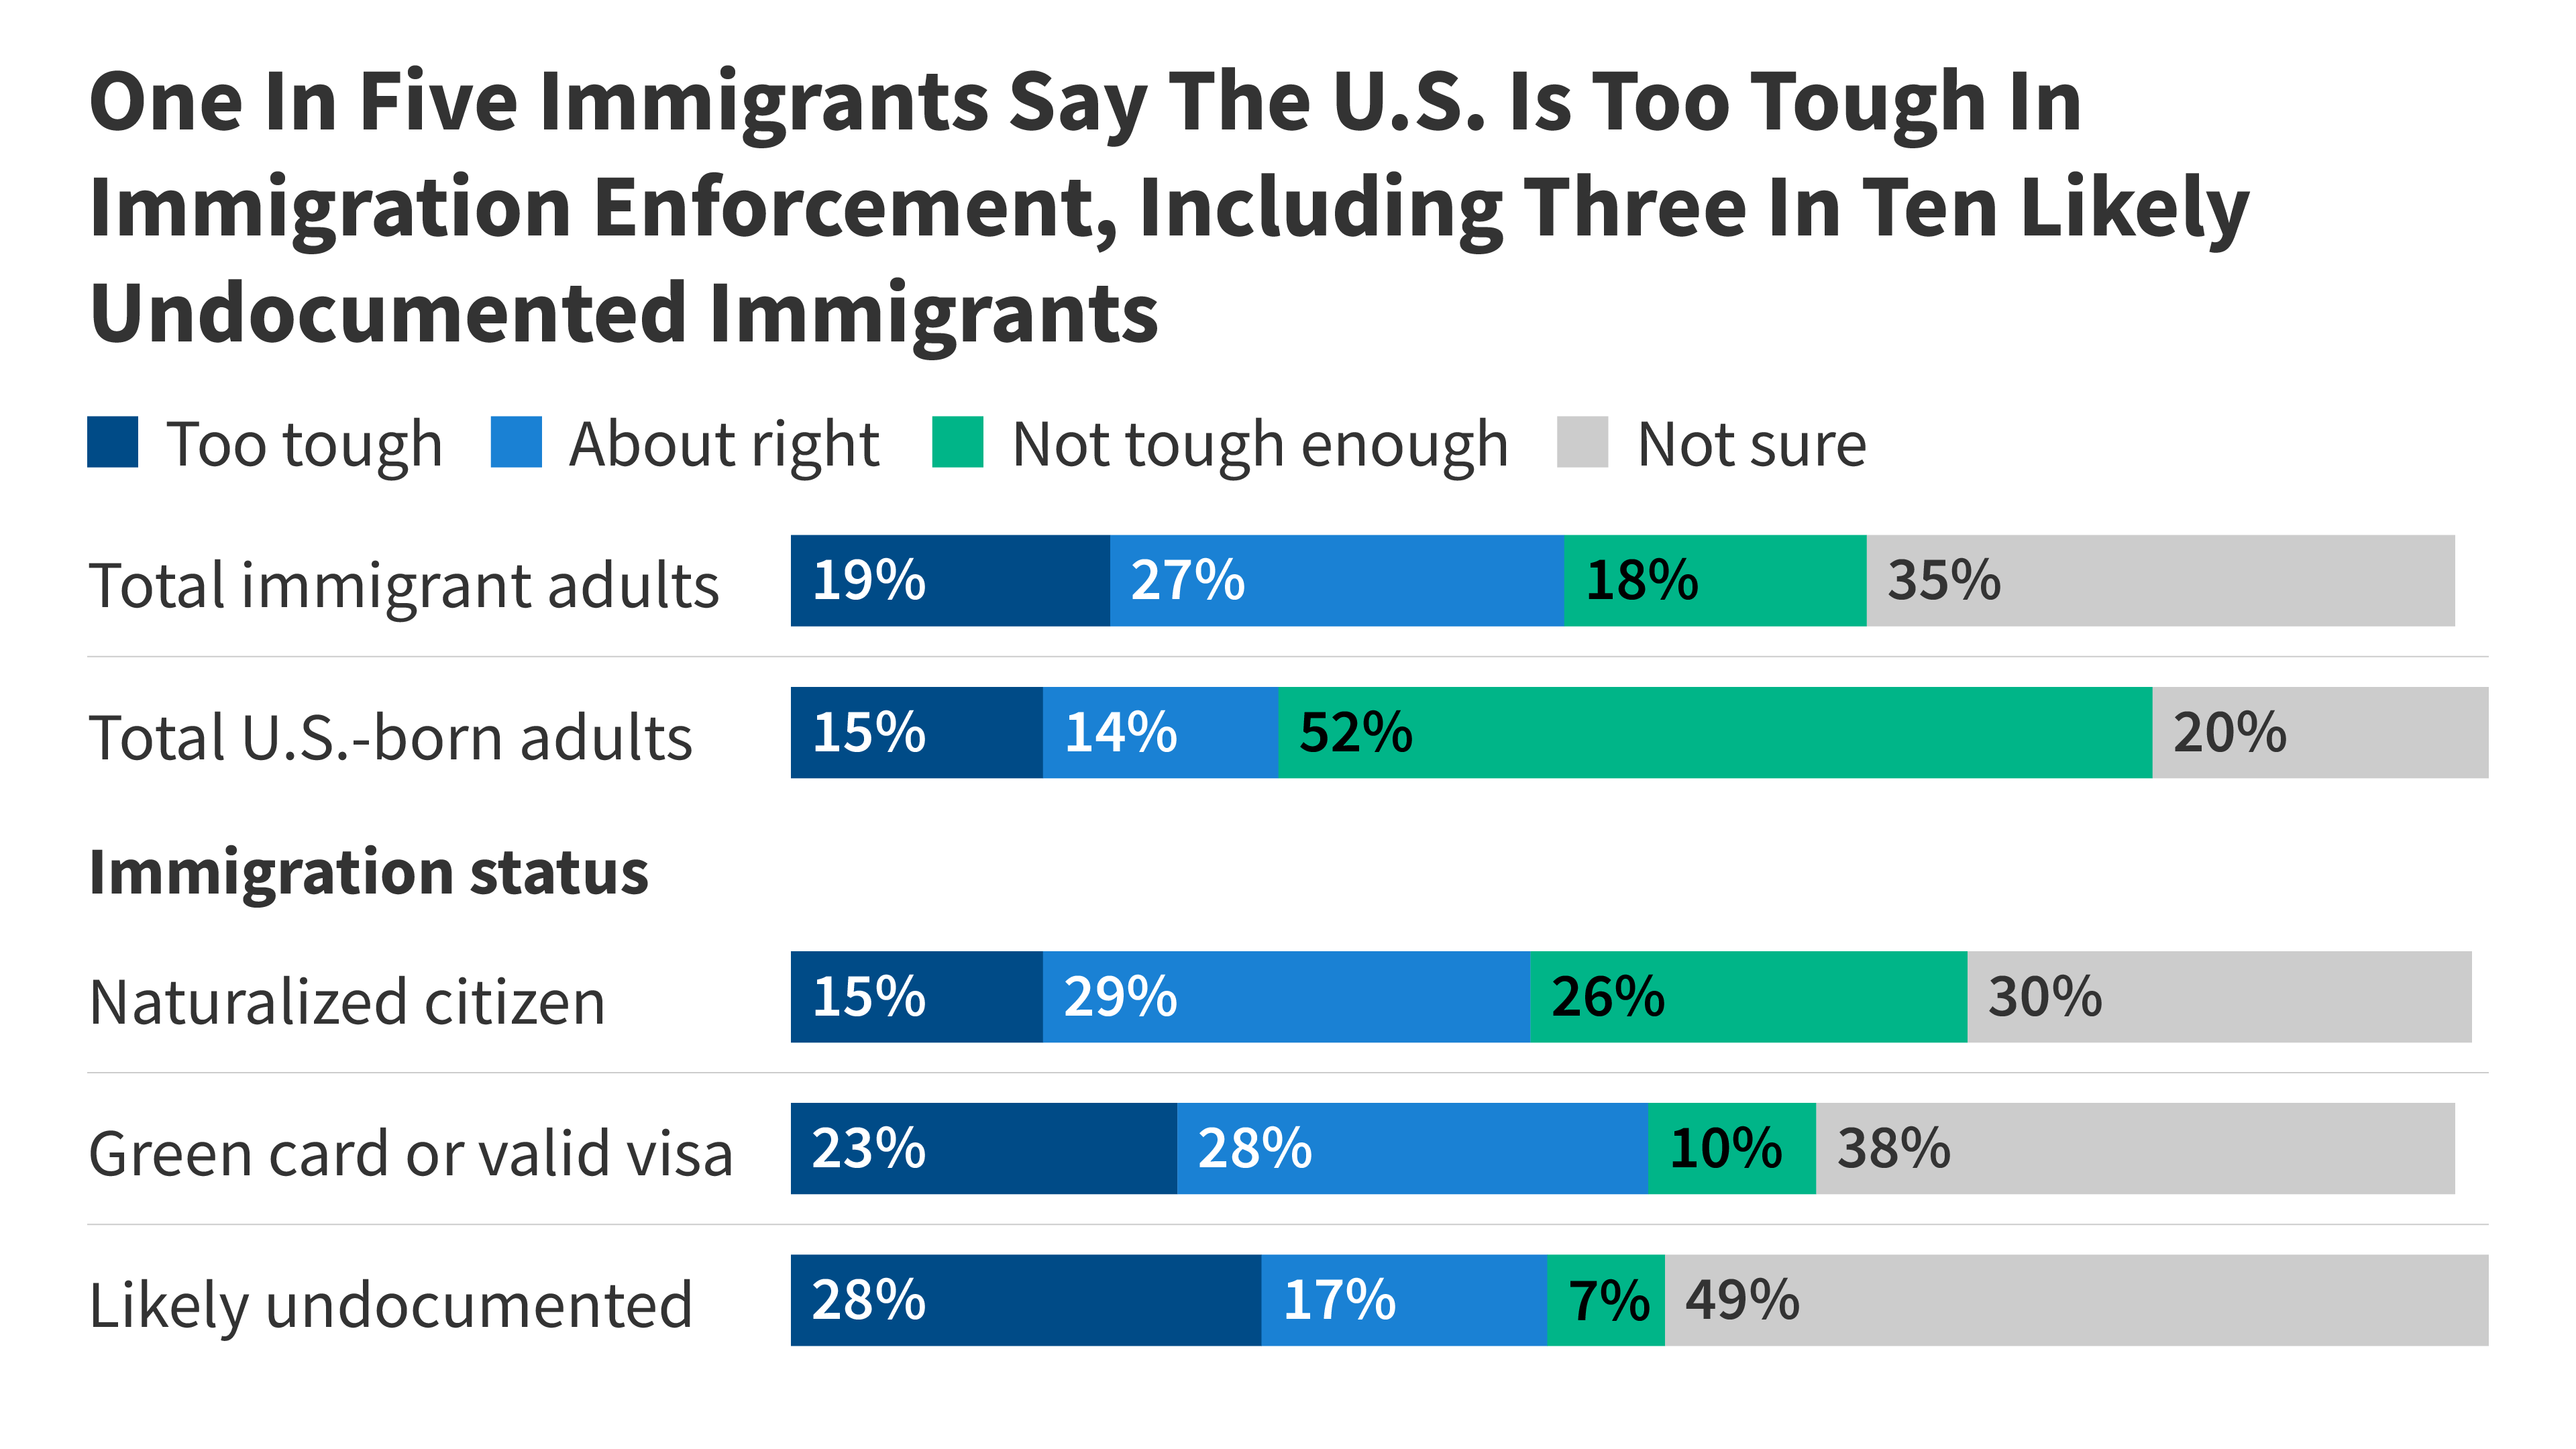 Political Preferences and Views on U.S. Immigration Policy Among Immigrants in the U.S.: A Snapshot from the 2023 KFF/LA Times Survey of Immigrants